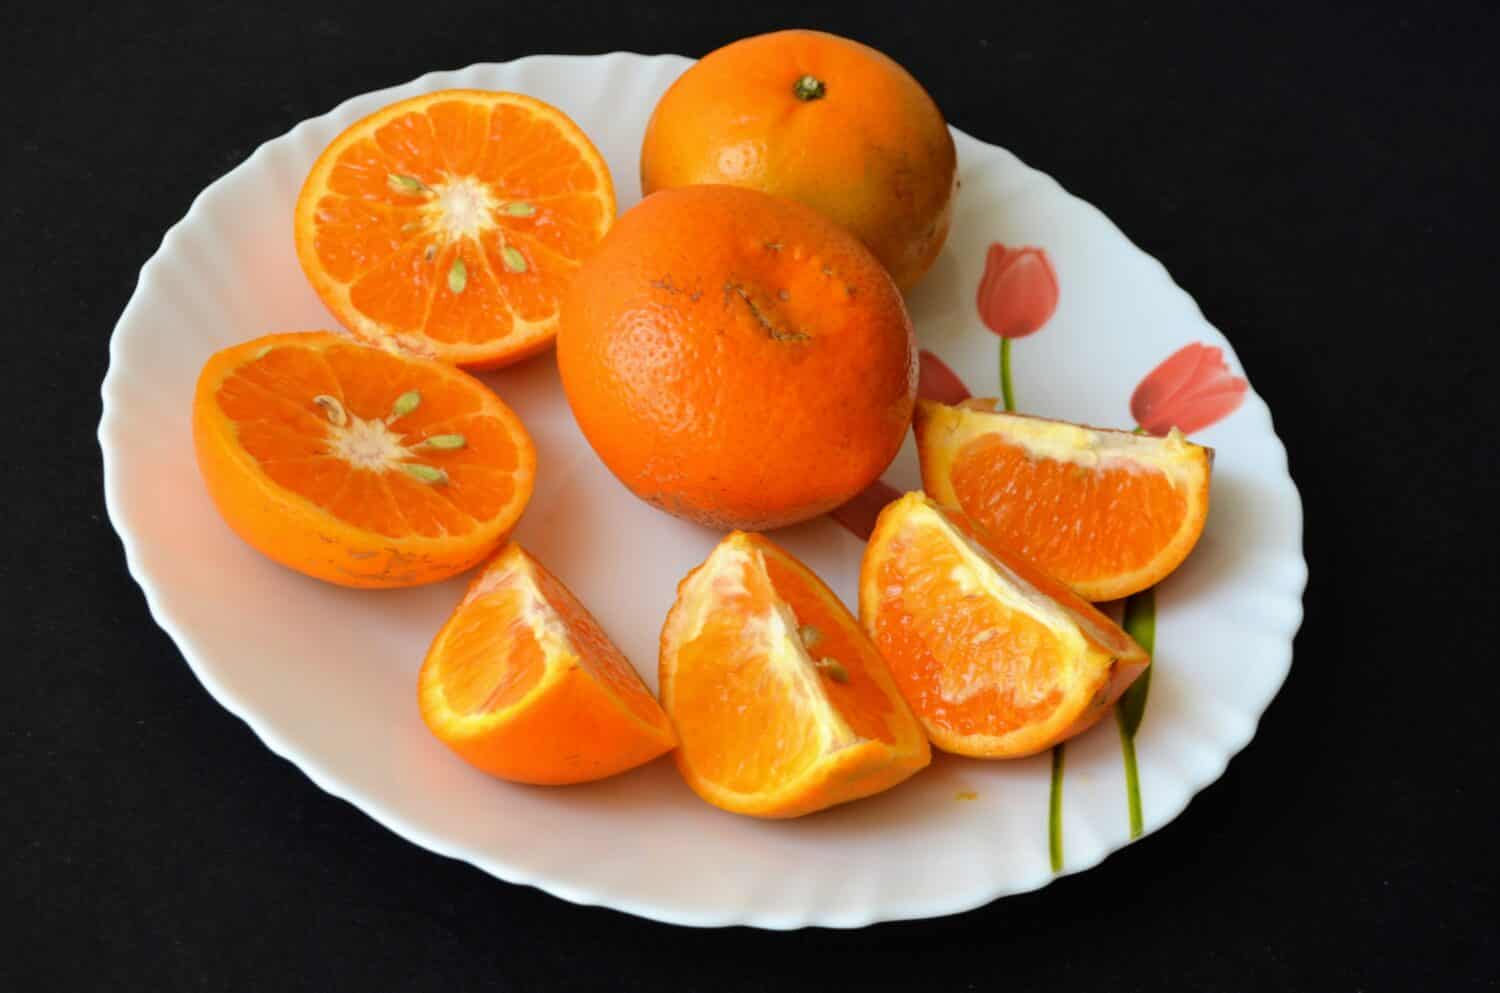 Discover 17+ Orange Fruits: The Complete List - A-Z Animals